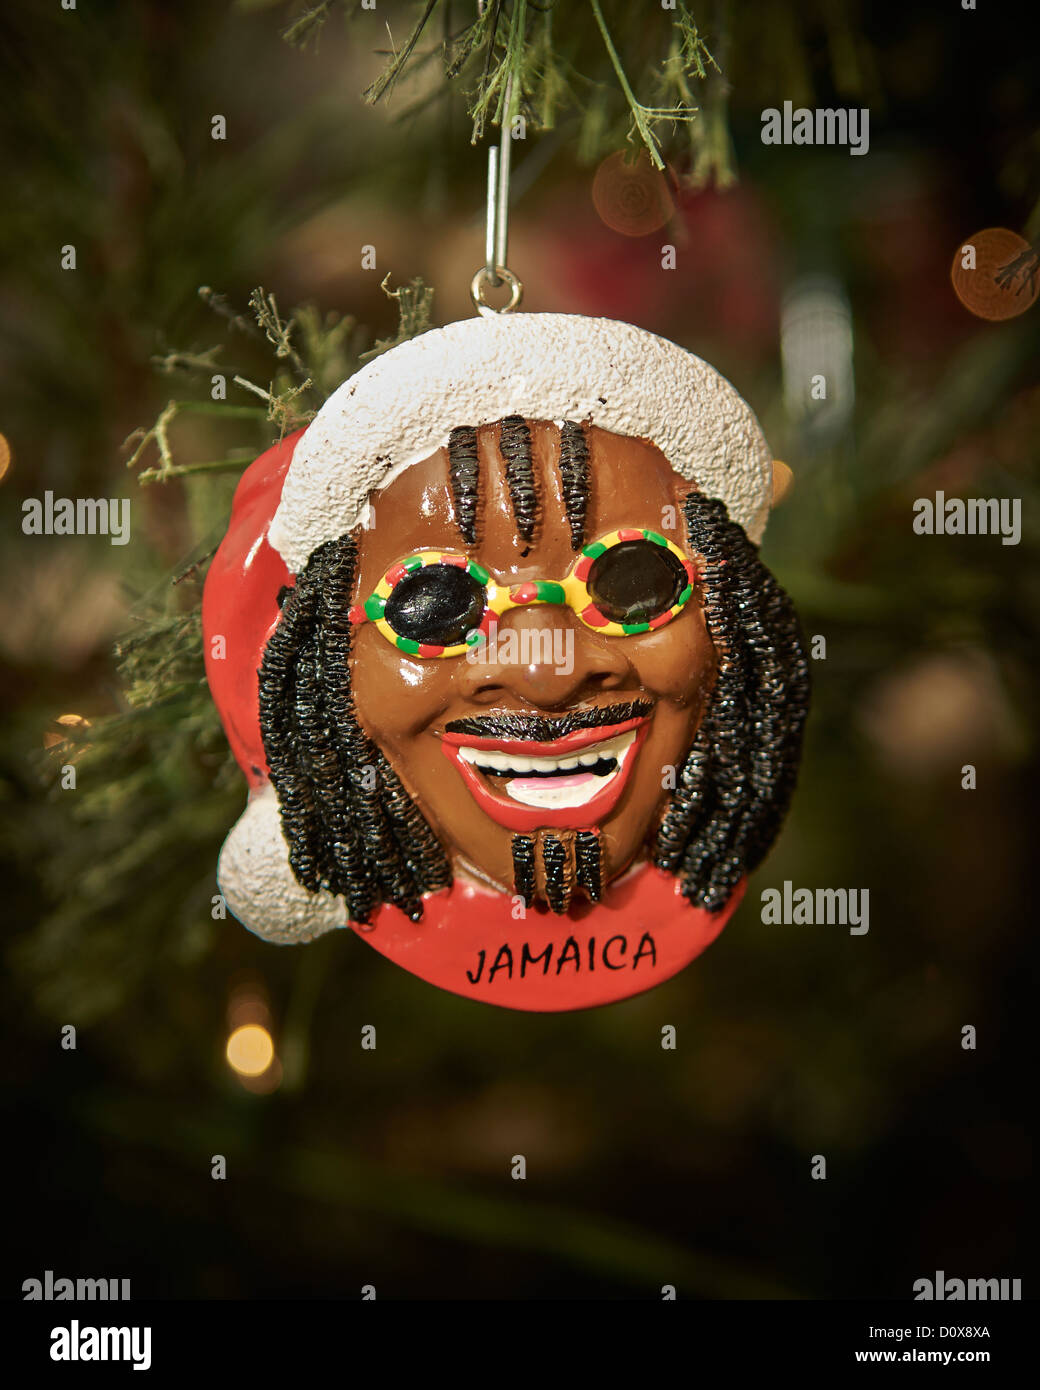 A Christmas tree ornament depicting a smiling African American male with dreadlocks and sunglasses, with the word Jamaica. Stock Photo